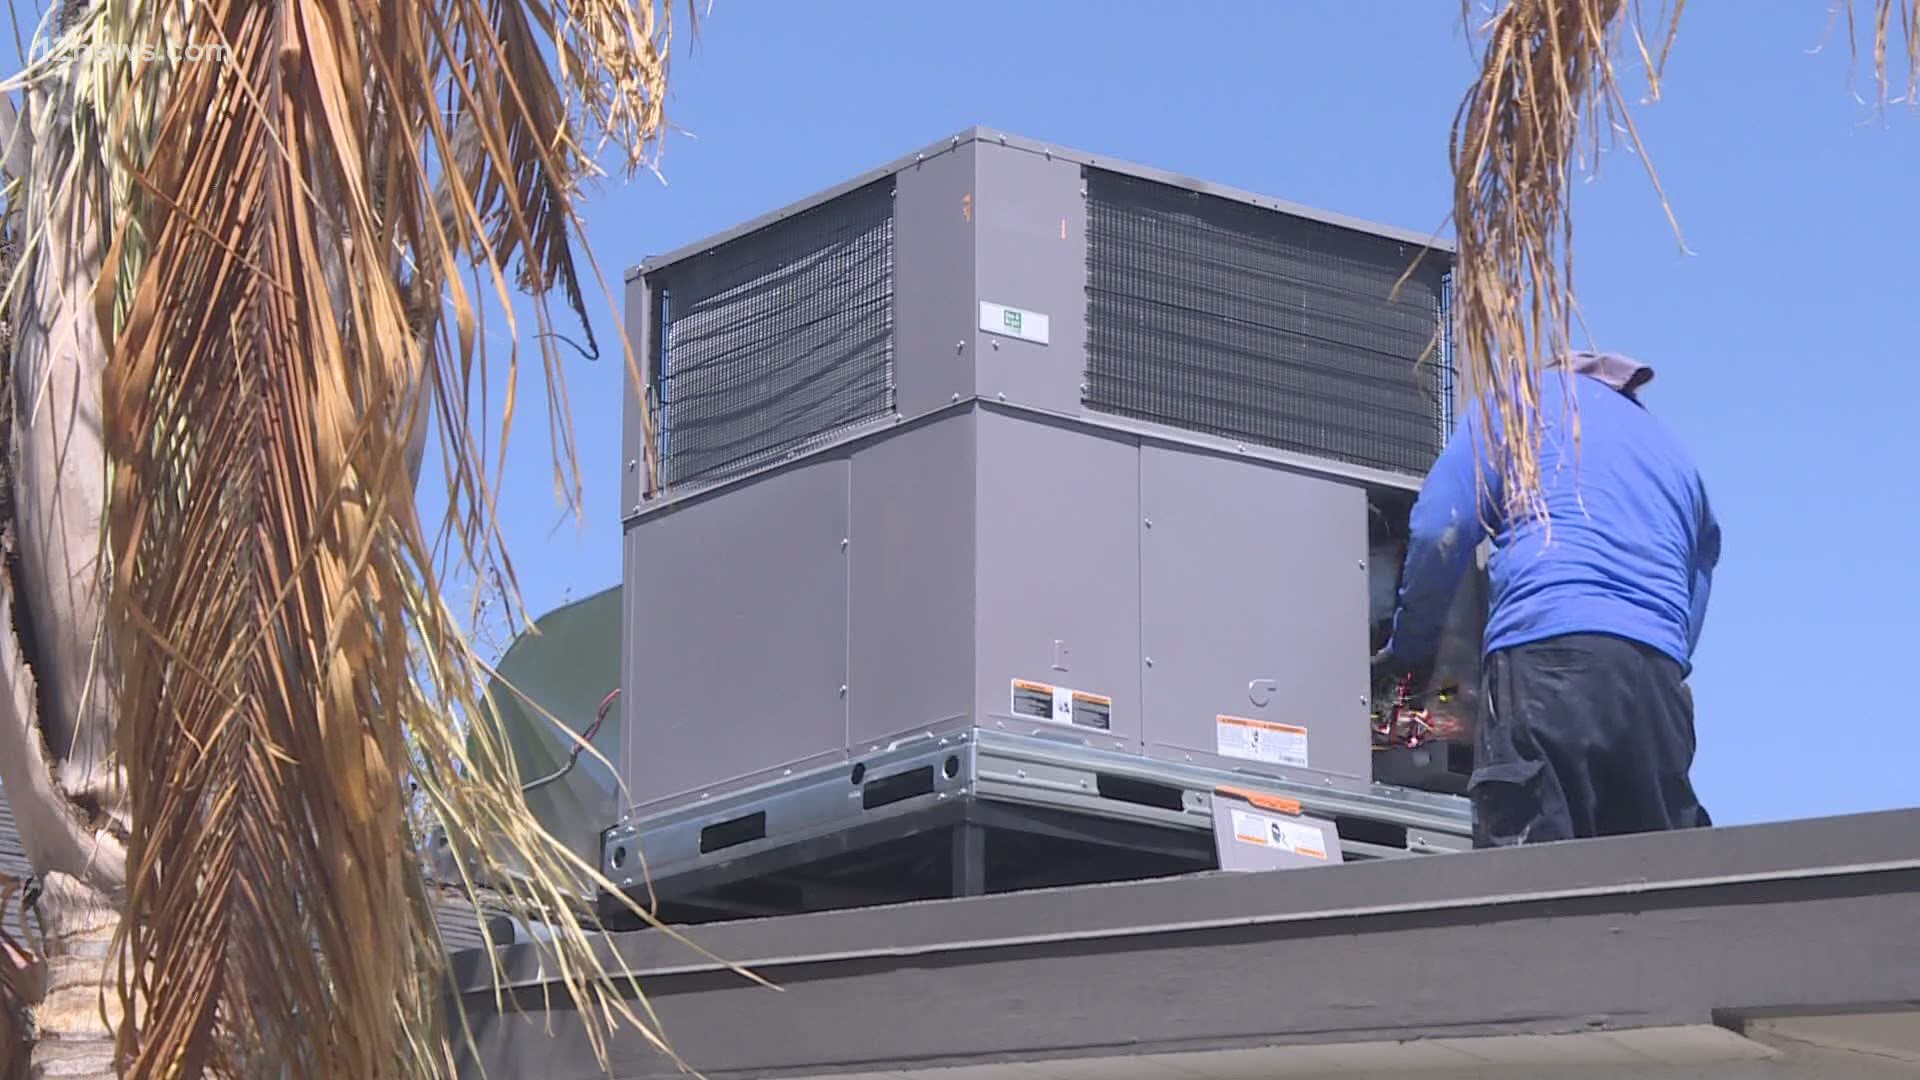 Valley A/C units have been working overtime this summer and probably will be for the next few weeks. Experts weigh in on when it's time to repair or replace the unit